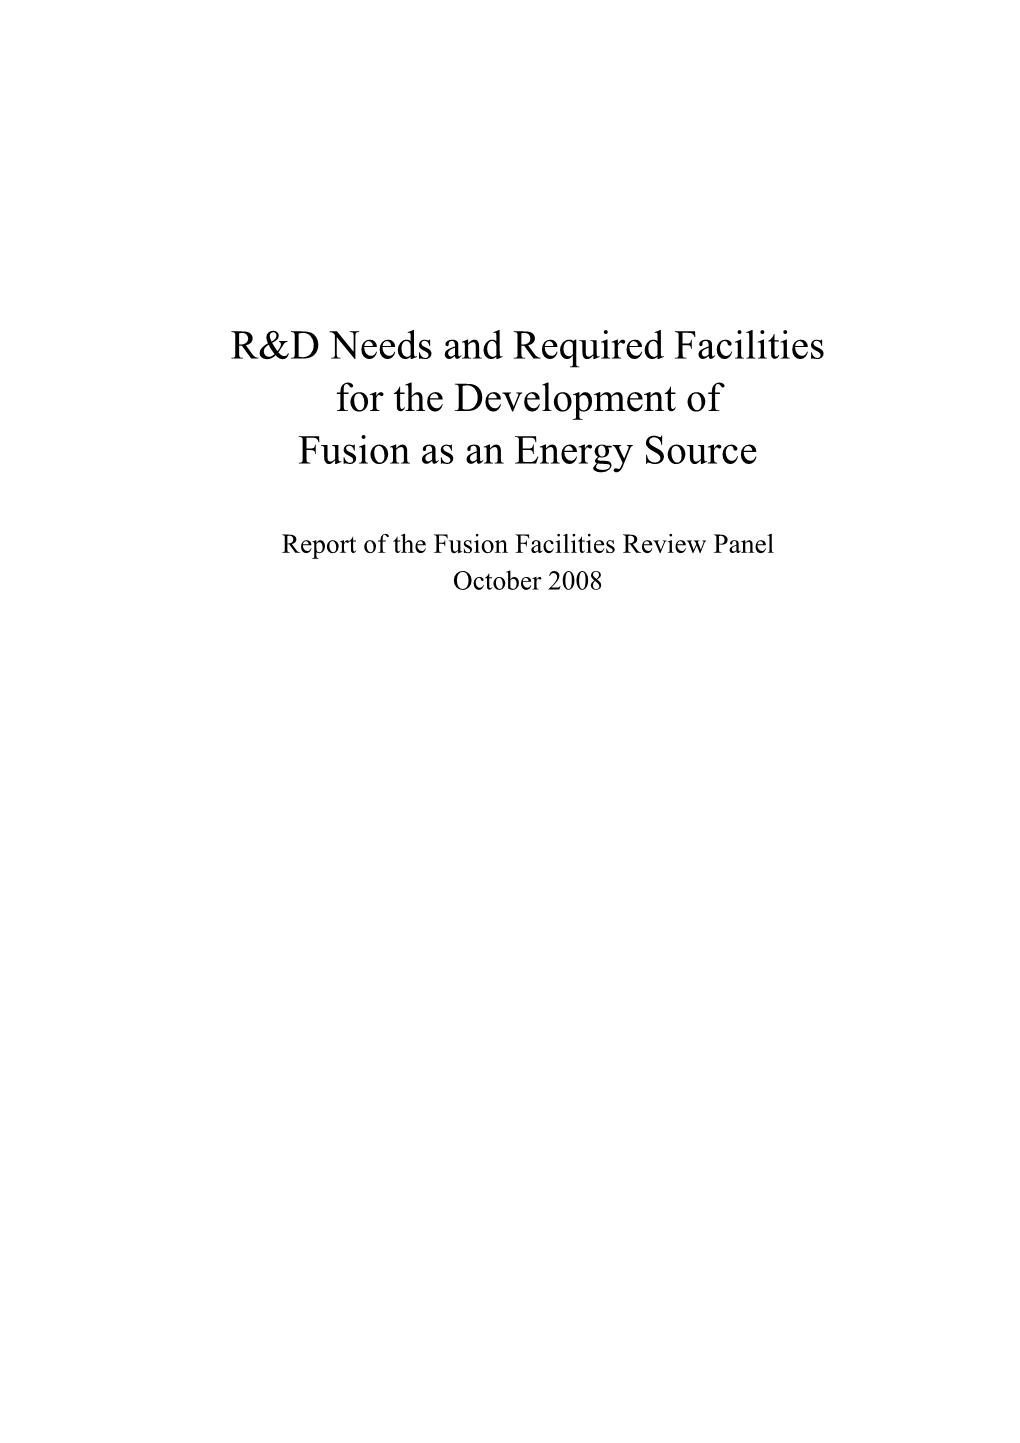 R&D Needs and Required Facilities for the Development of Fusion As